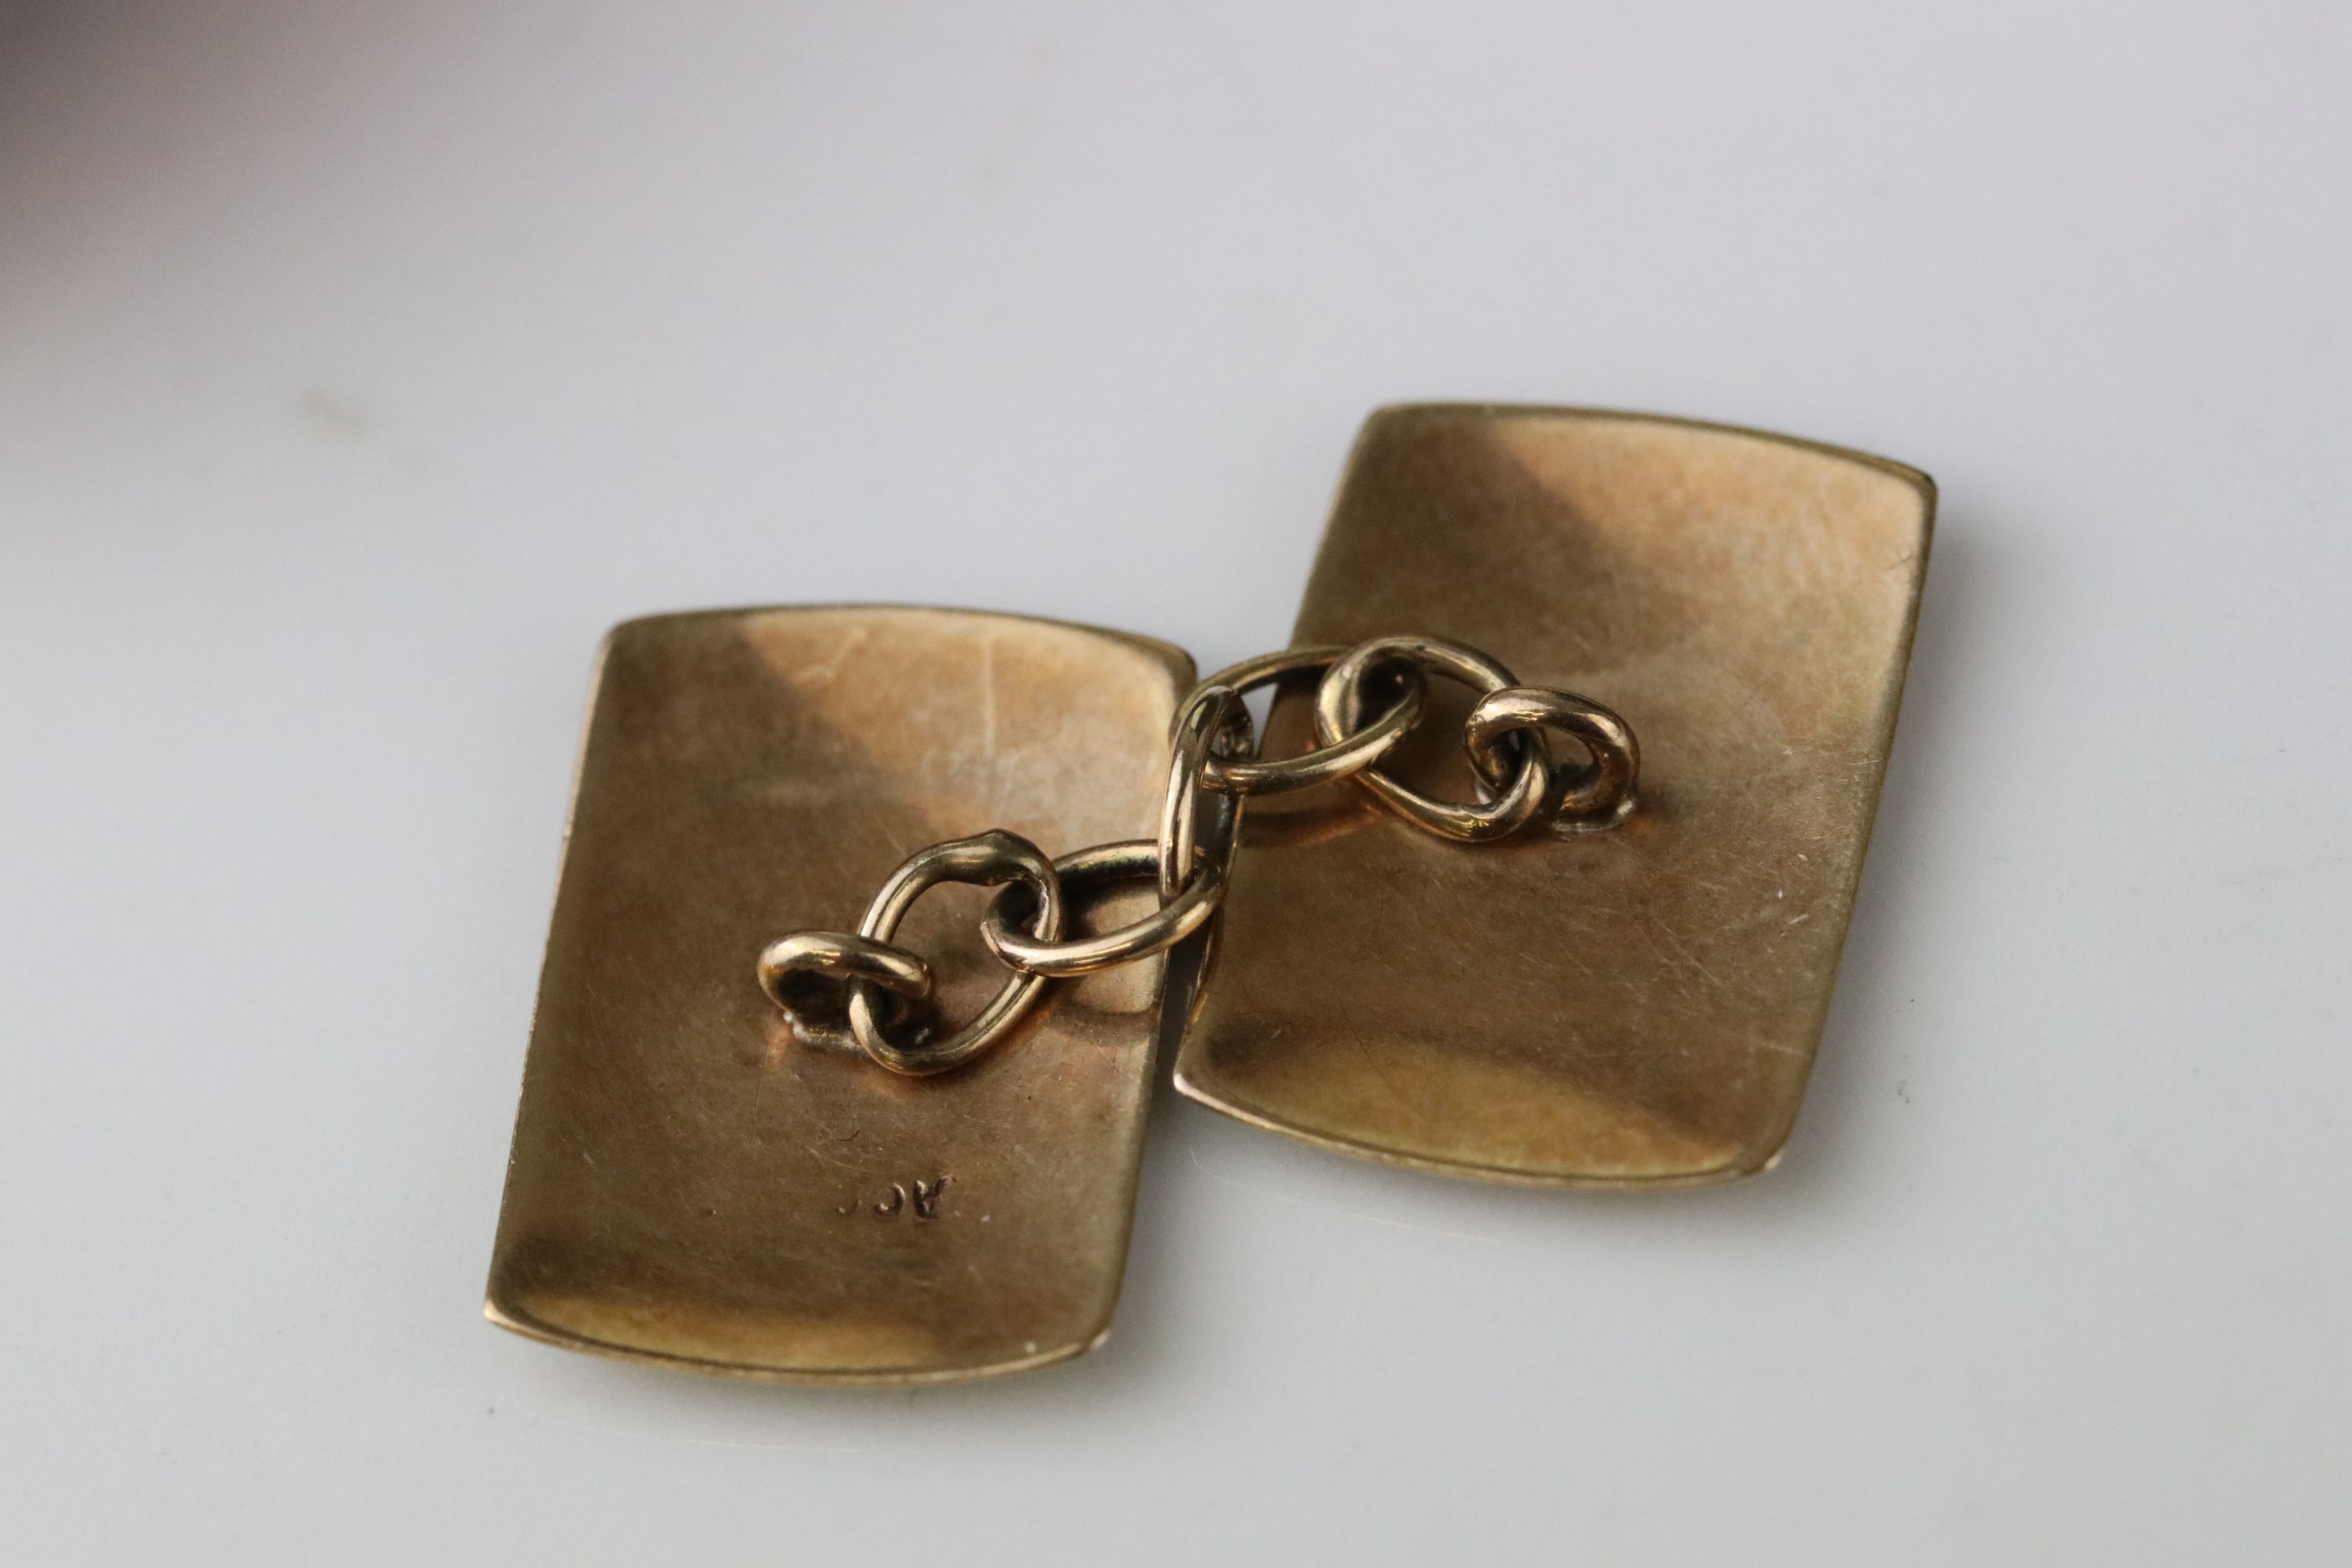 Pair of rose metal chain link cufflinks, rectangular blank panels with engraved decorative border, - Image 4 of 4